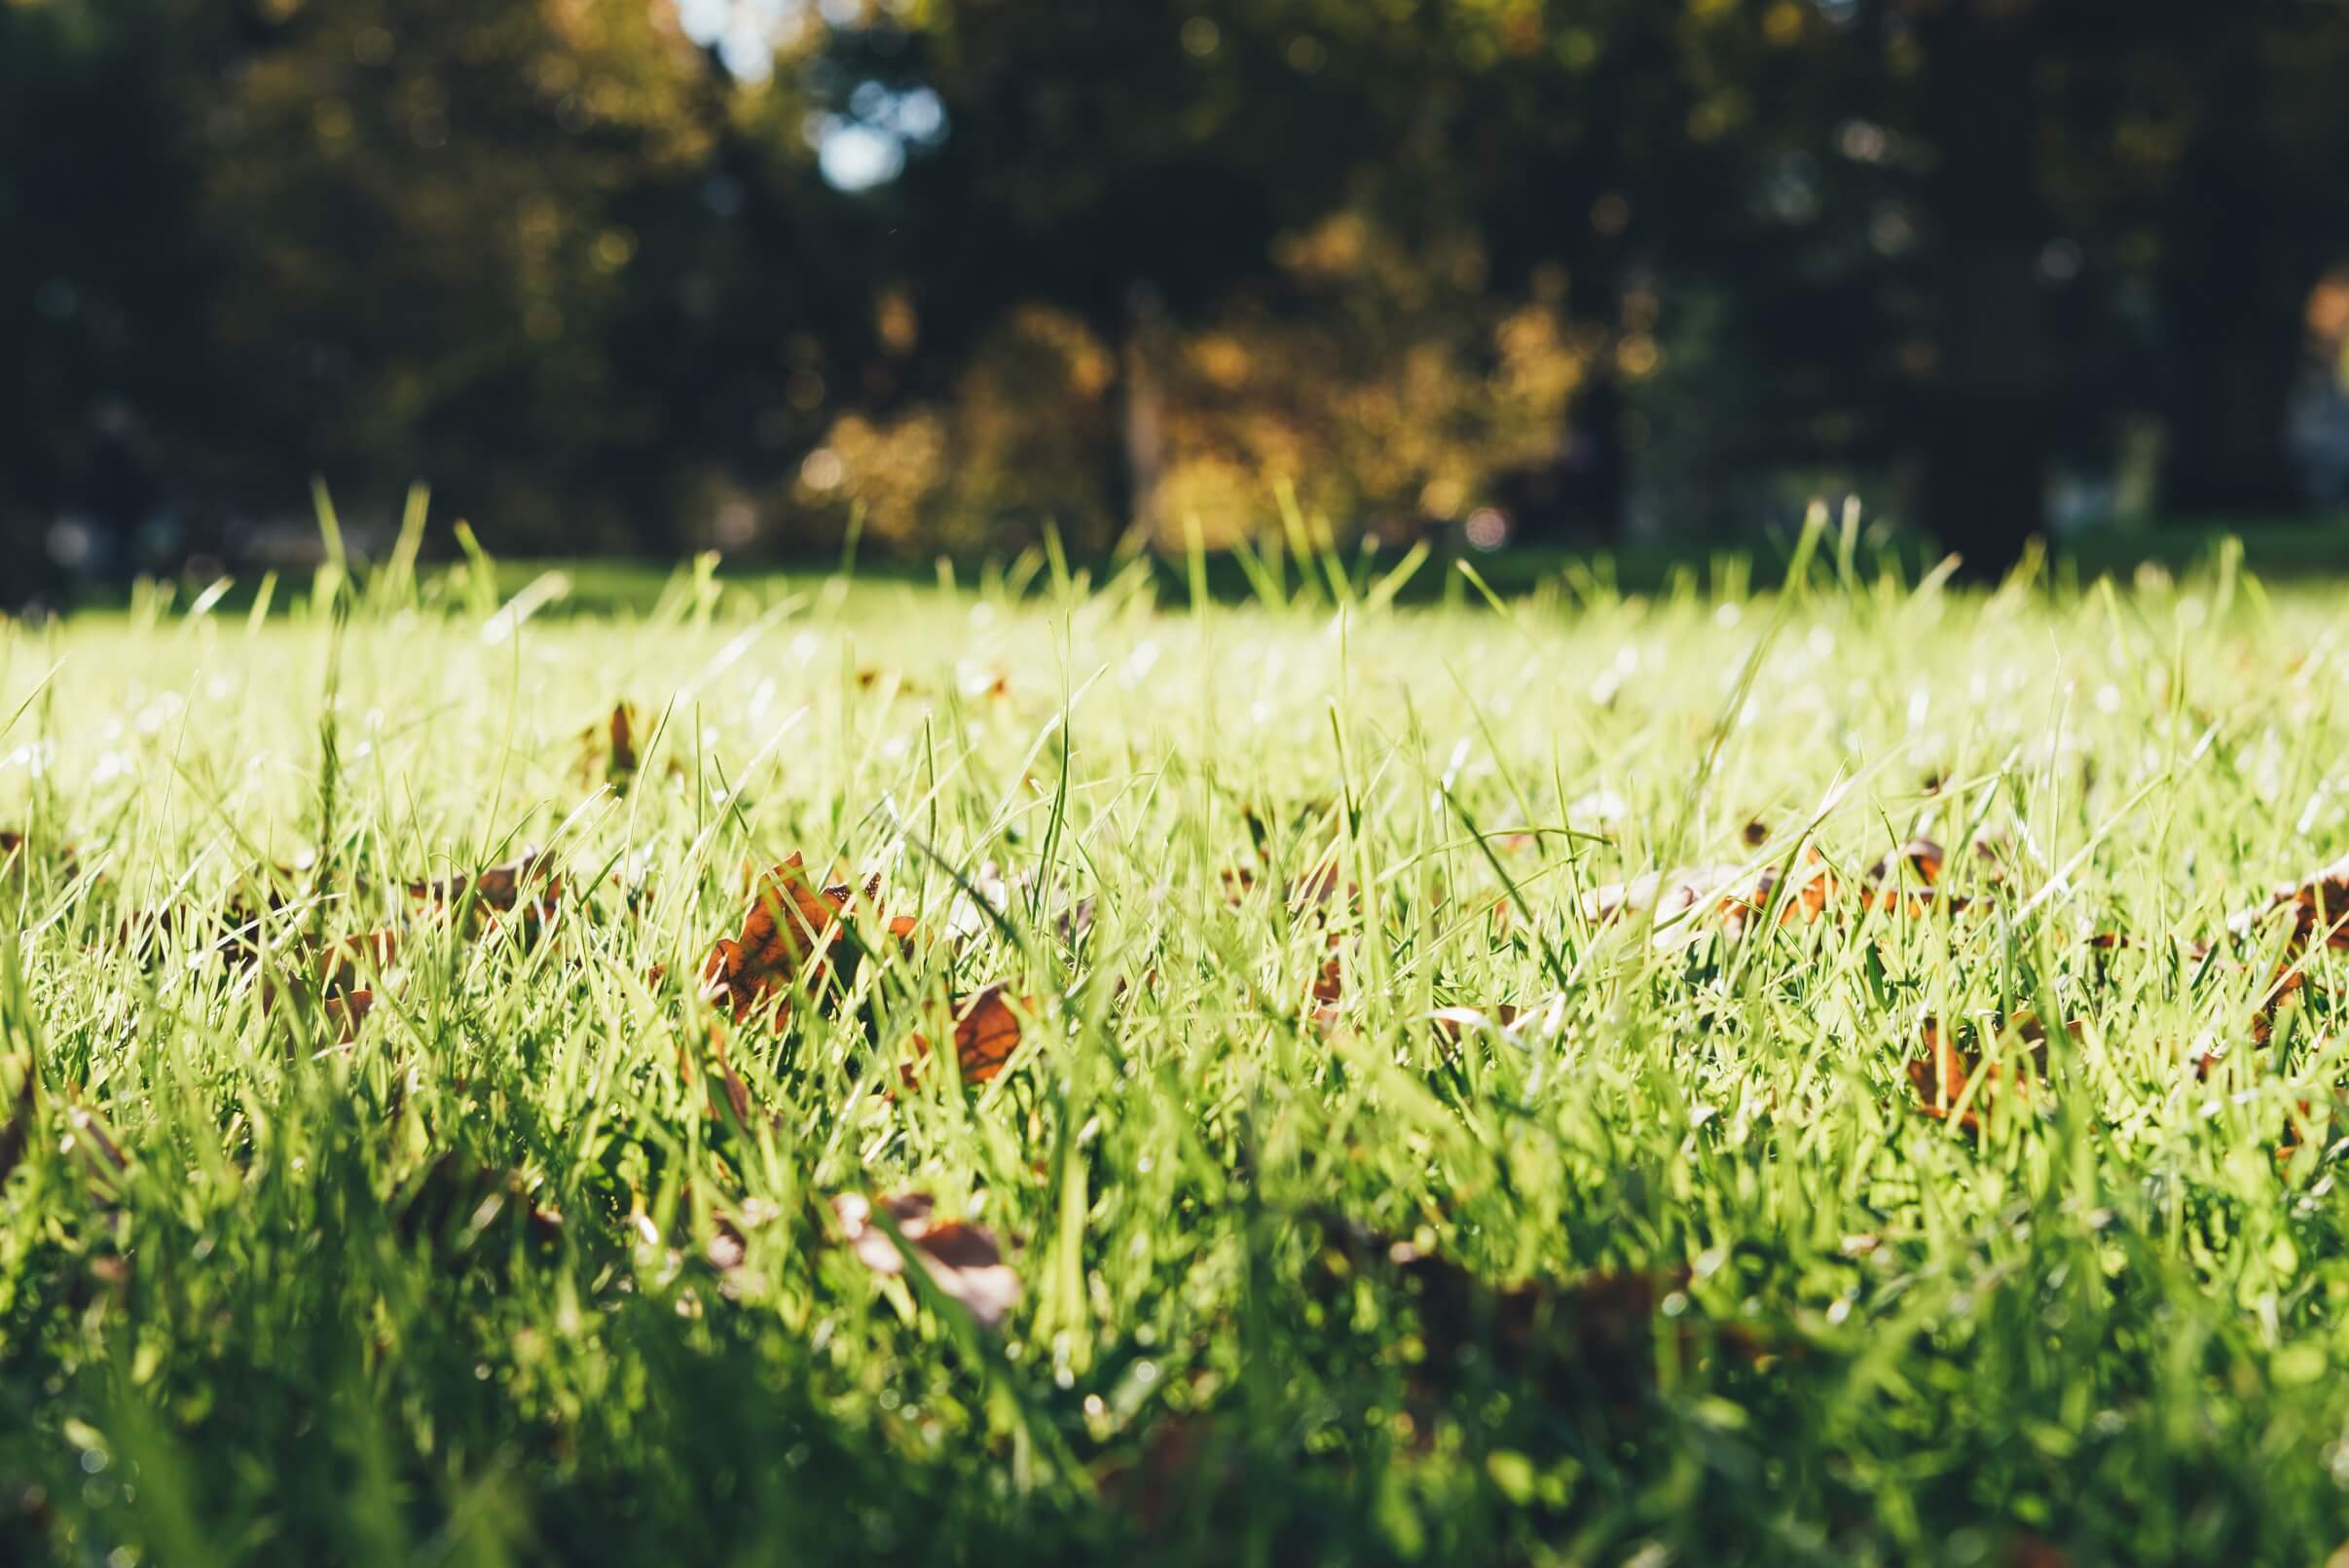 A close-up of a green lawn